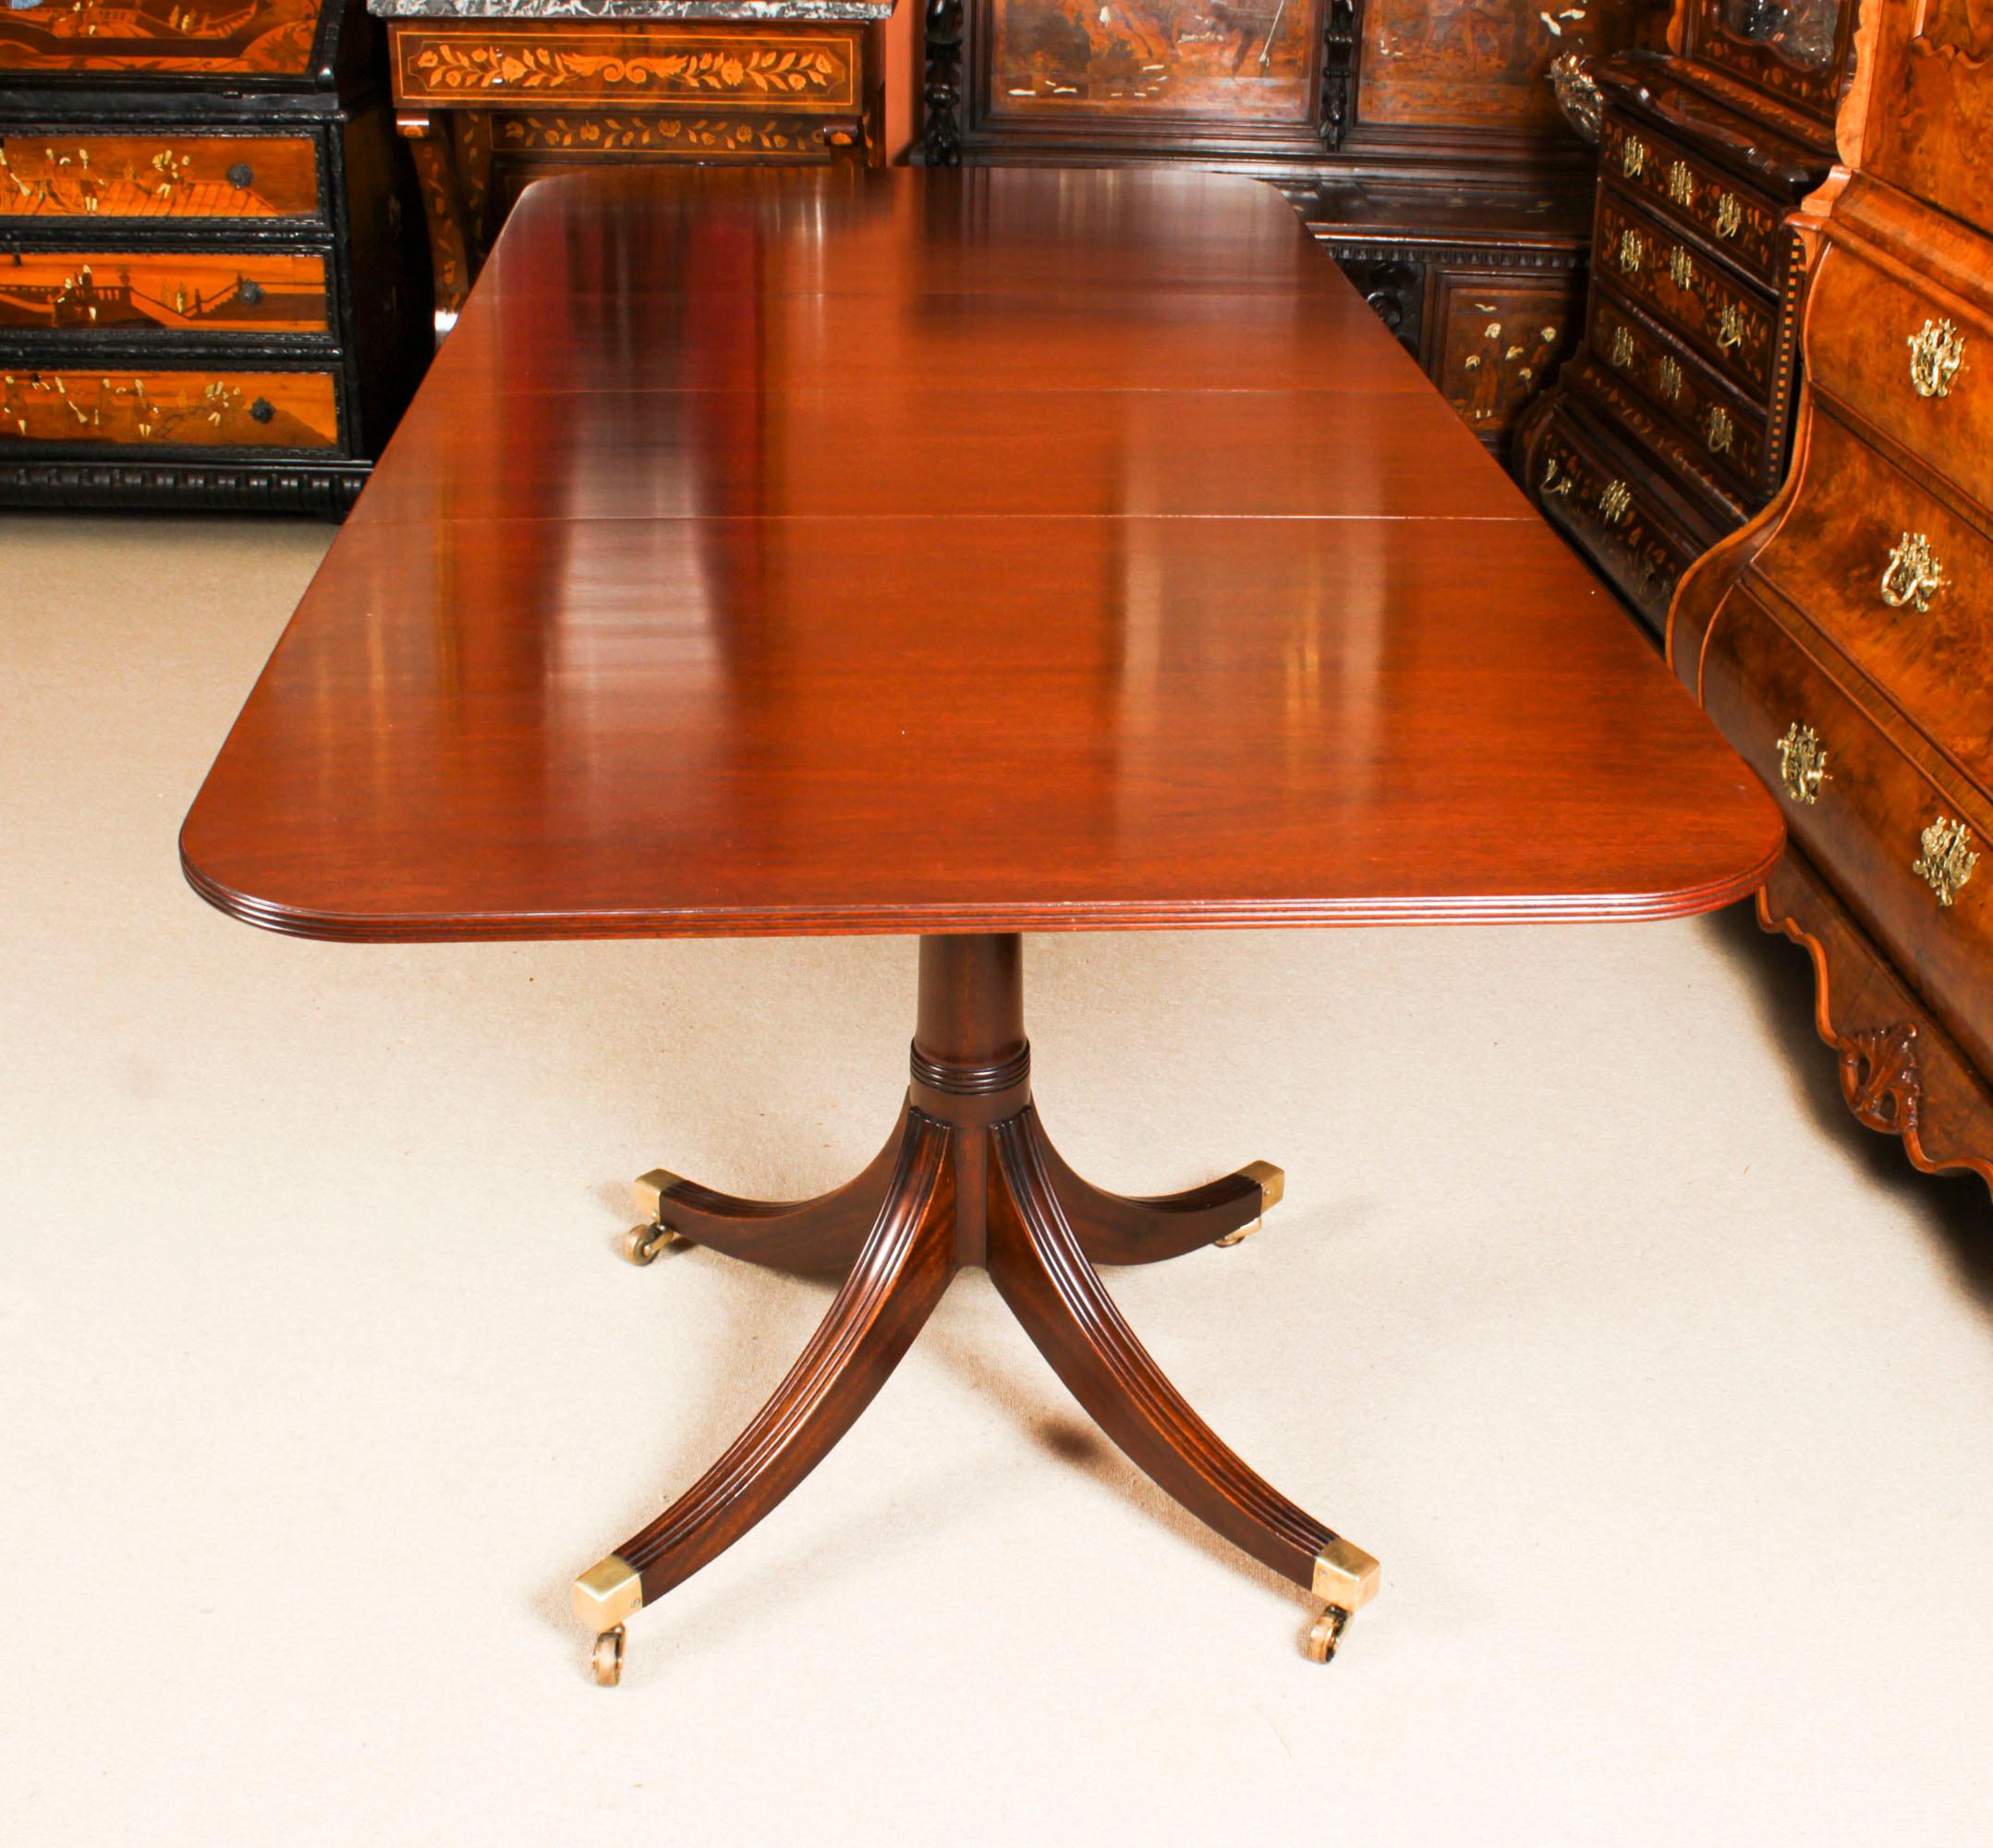 Regency Revival Vintage 8ft Dining Table by William Tillman & 10 Hepplewhite chairs 20th C